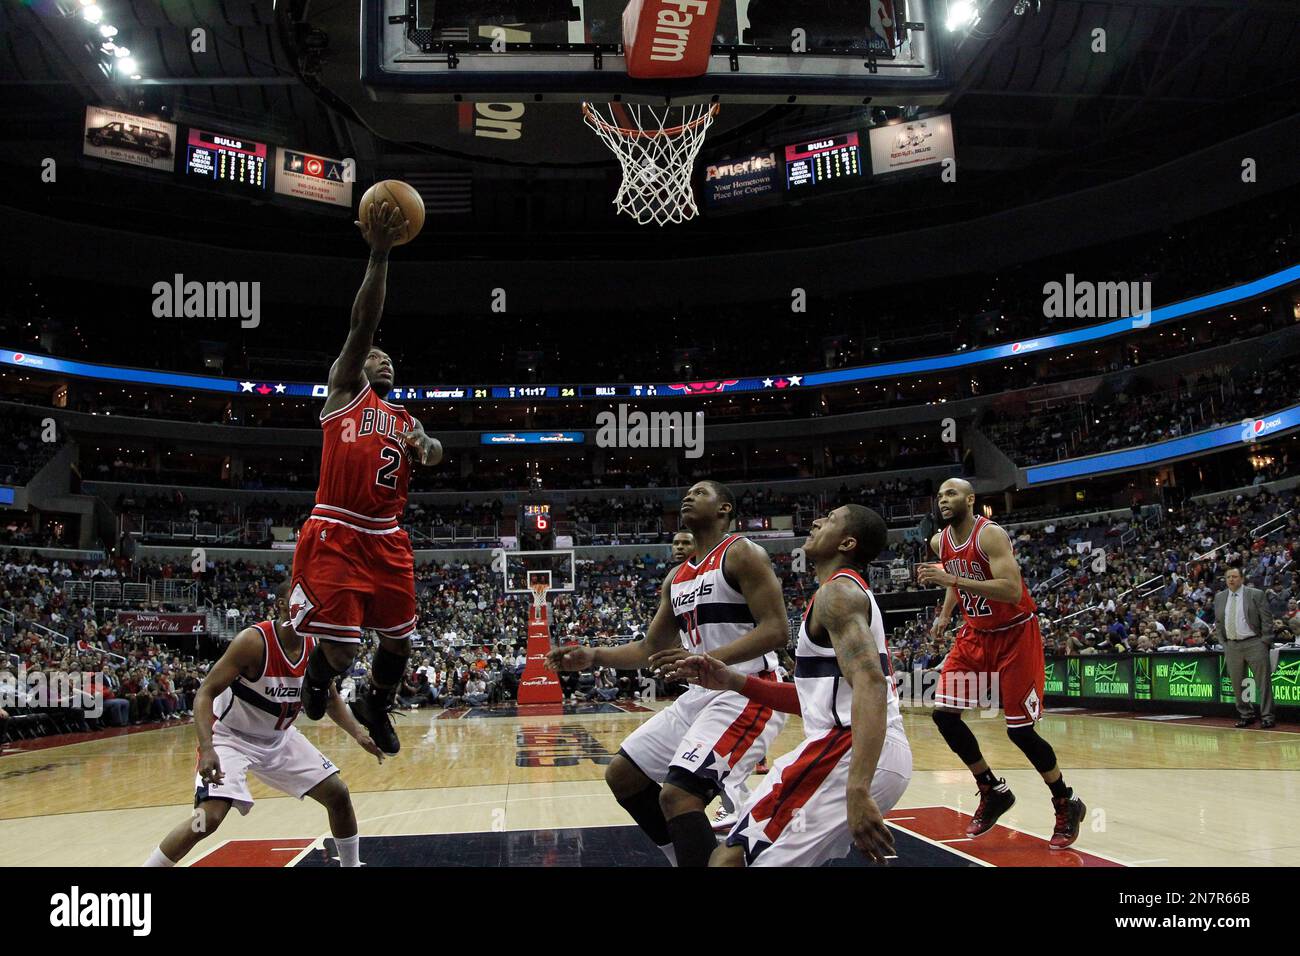 Chicago Bulls guard Nate Robinson (R) looks up at the scoreboard as referee David Guthrie stands on the floor during the fourth quarter of Game 3 of the NBA Eastern Conference semifinals